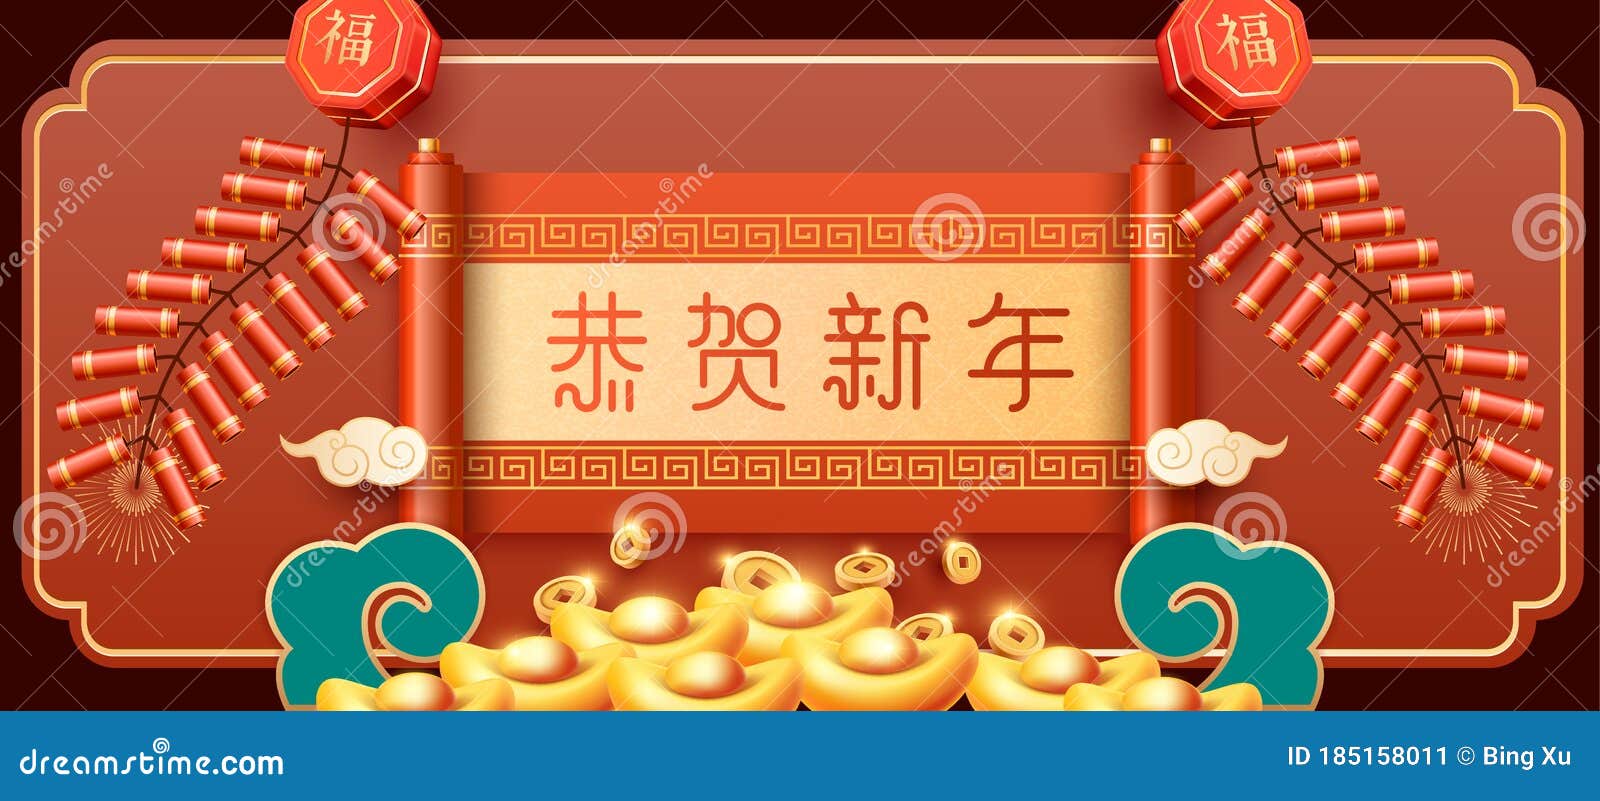 Happy Chinese New Year Festive Vector Card With Chinese Scroll Chinese Translation Xin Nian Kuai Le Red Spring Couplets And Fir Stock Vector Illustration Of China Gold 185158011